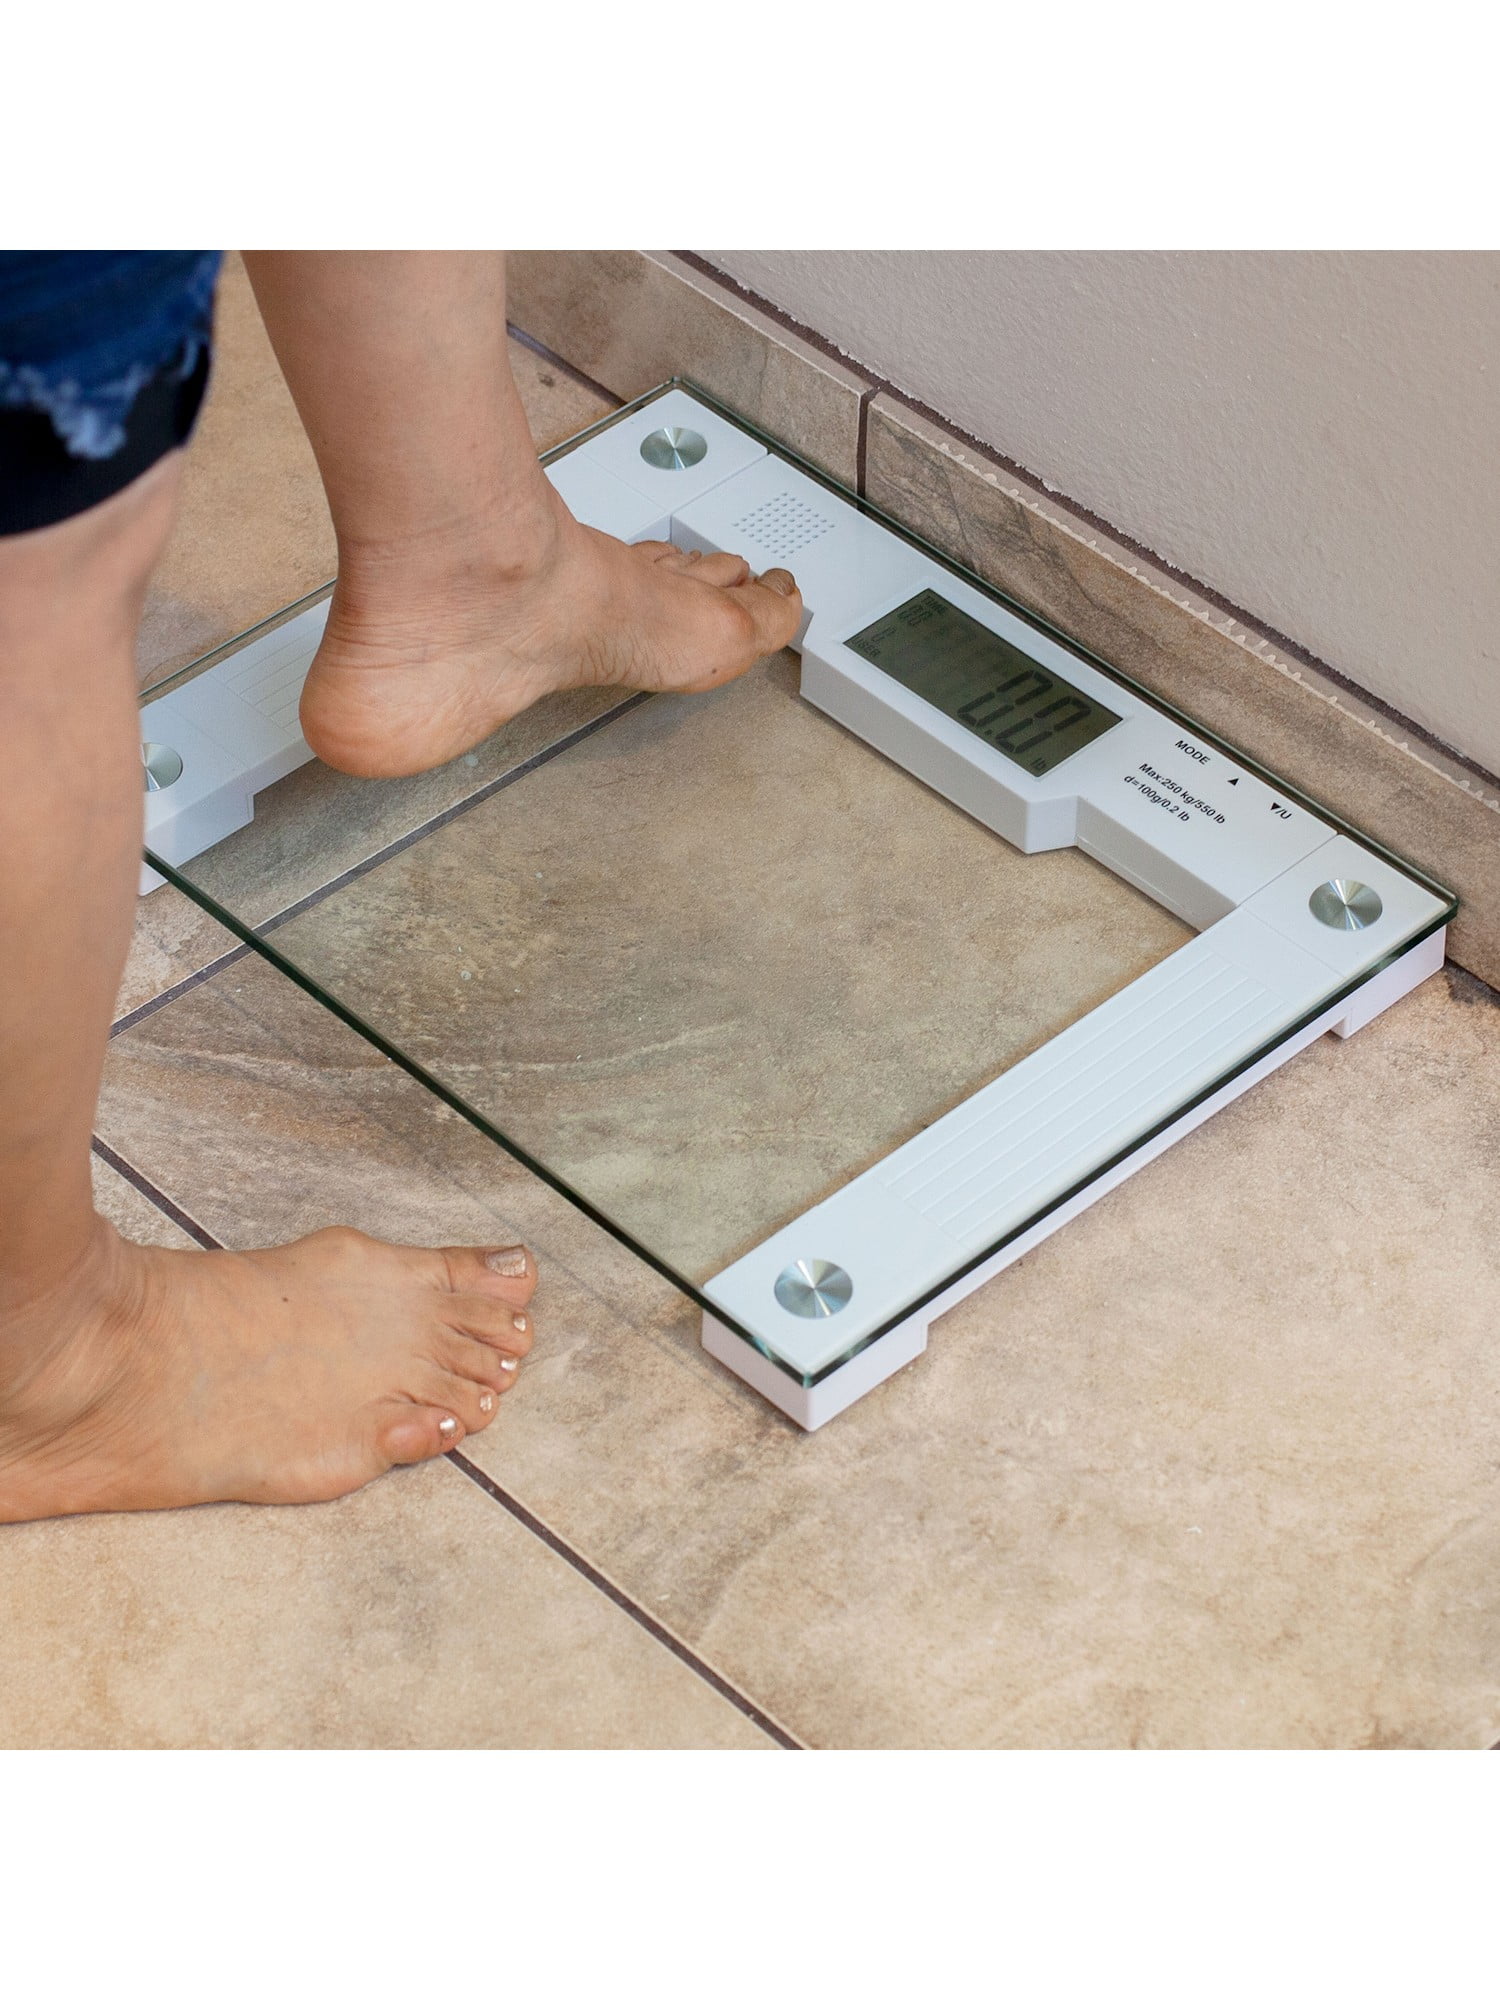 Extra Wide Glass Talking Digital Scale | The Bathroom Scale That Talks | Accurate Visual & Voice Display Digital Scale for Body Weight | 395 Pounds